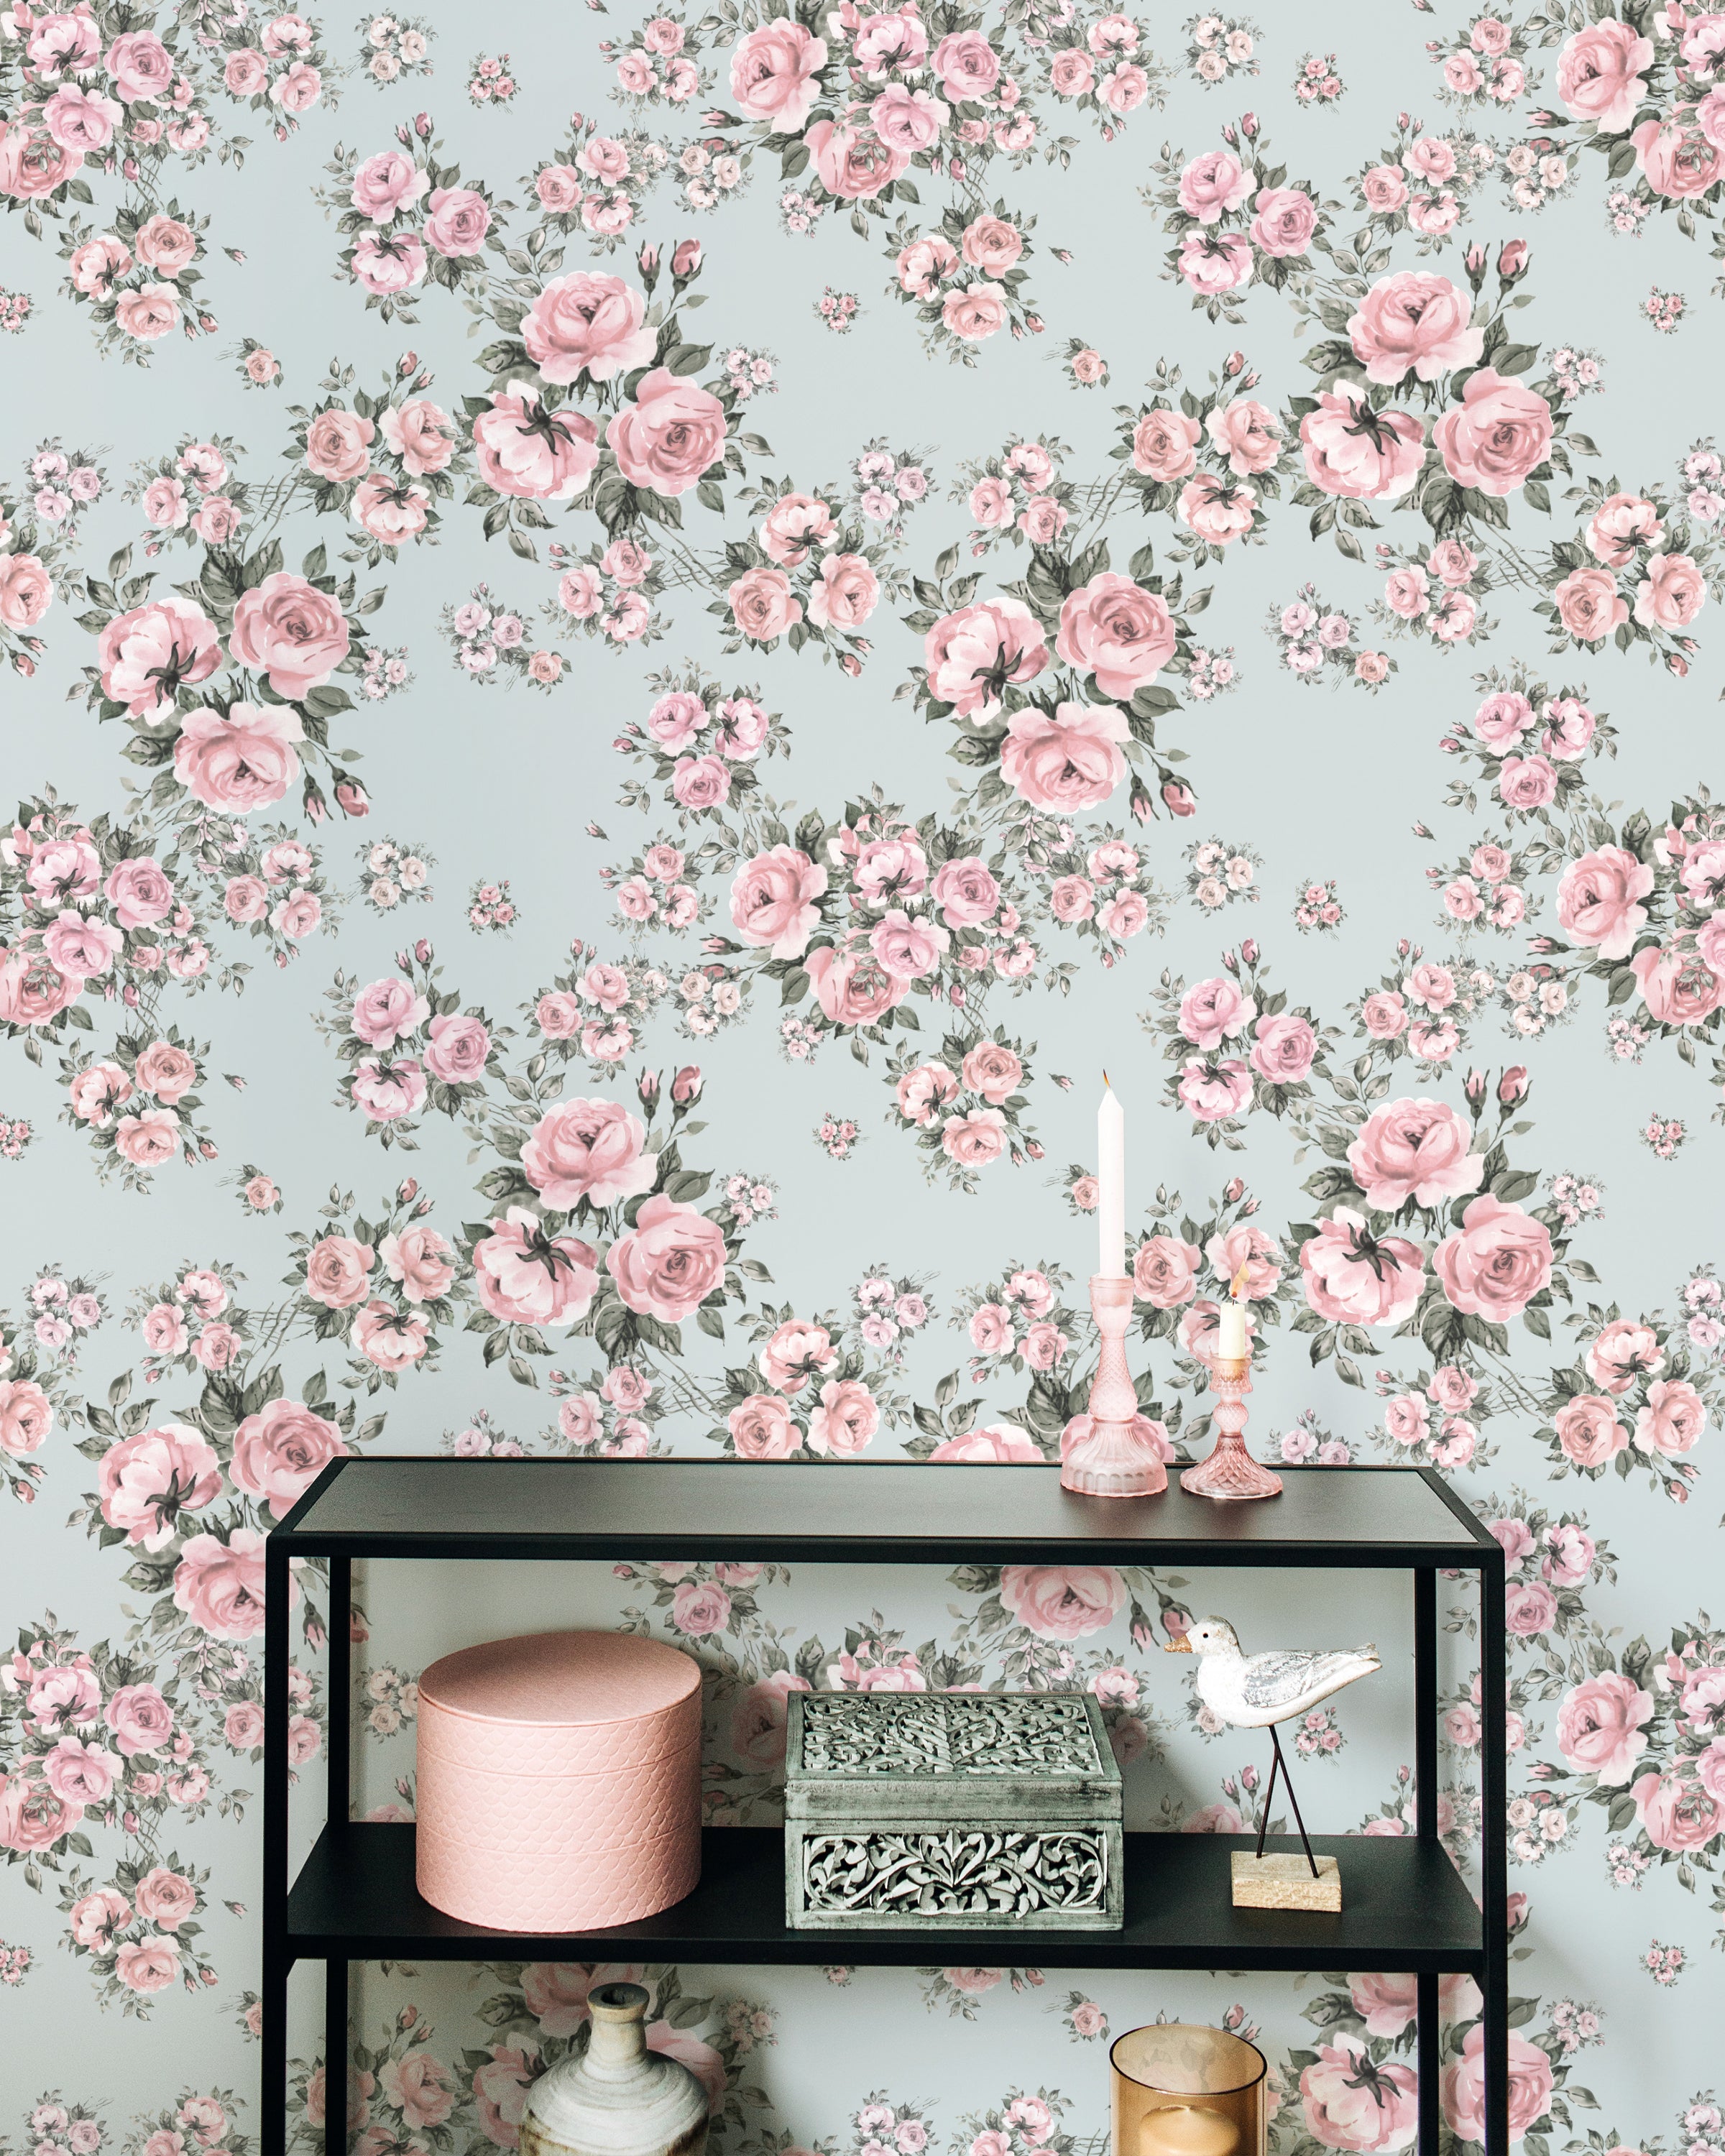 An elegant room with Rose Bouquet Wallpaper II showcasing a pattern of pink roses and green leaves on a light blue background. The decor includes a black shelving unit with candles, decorative boxes, and a bird ornament.